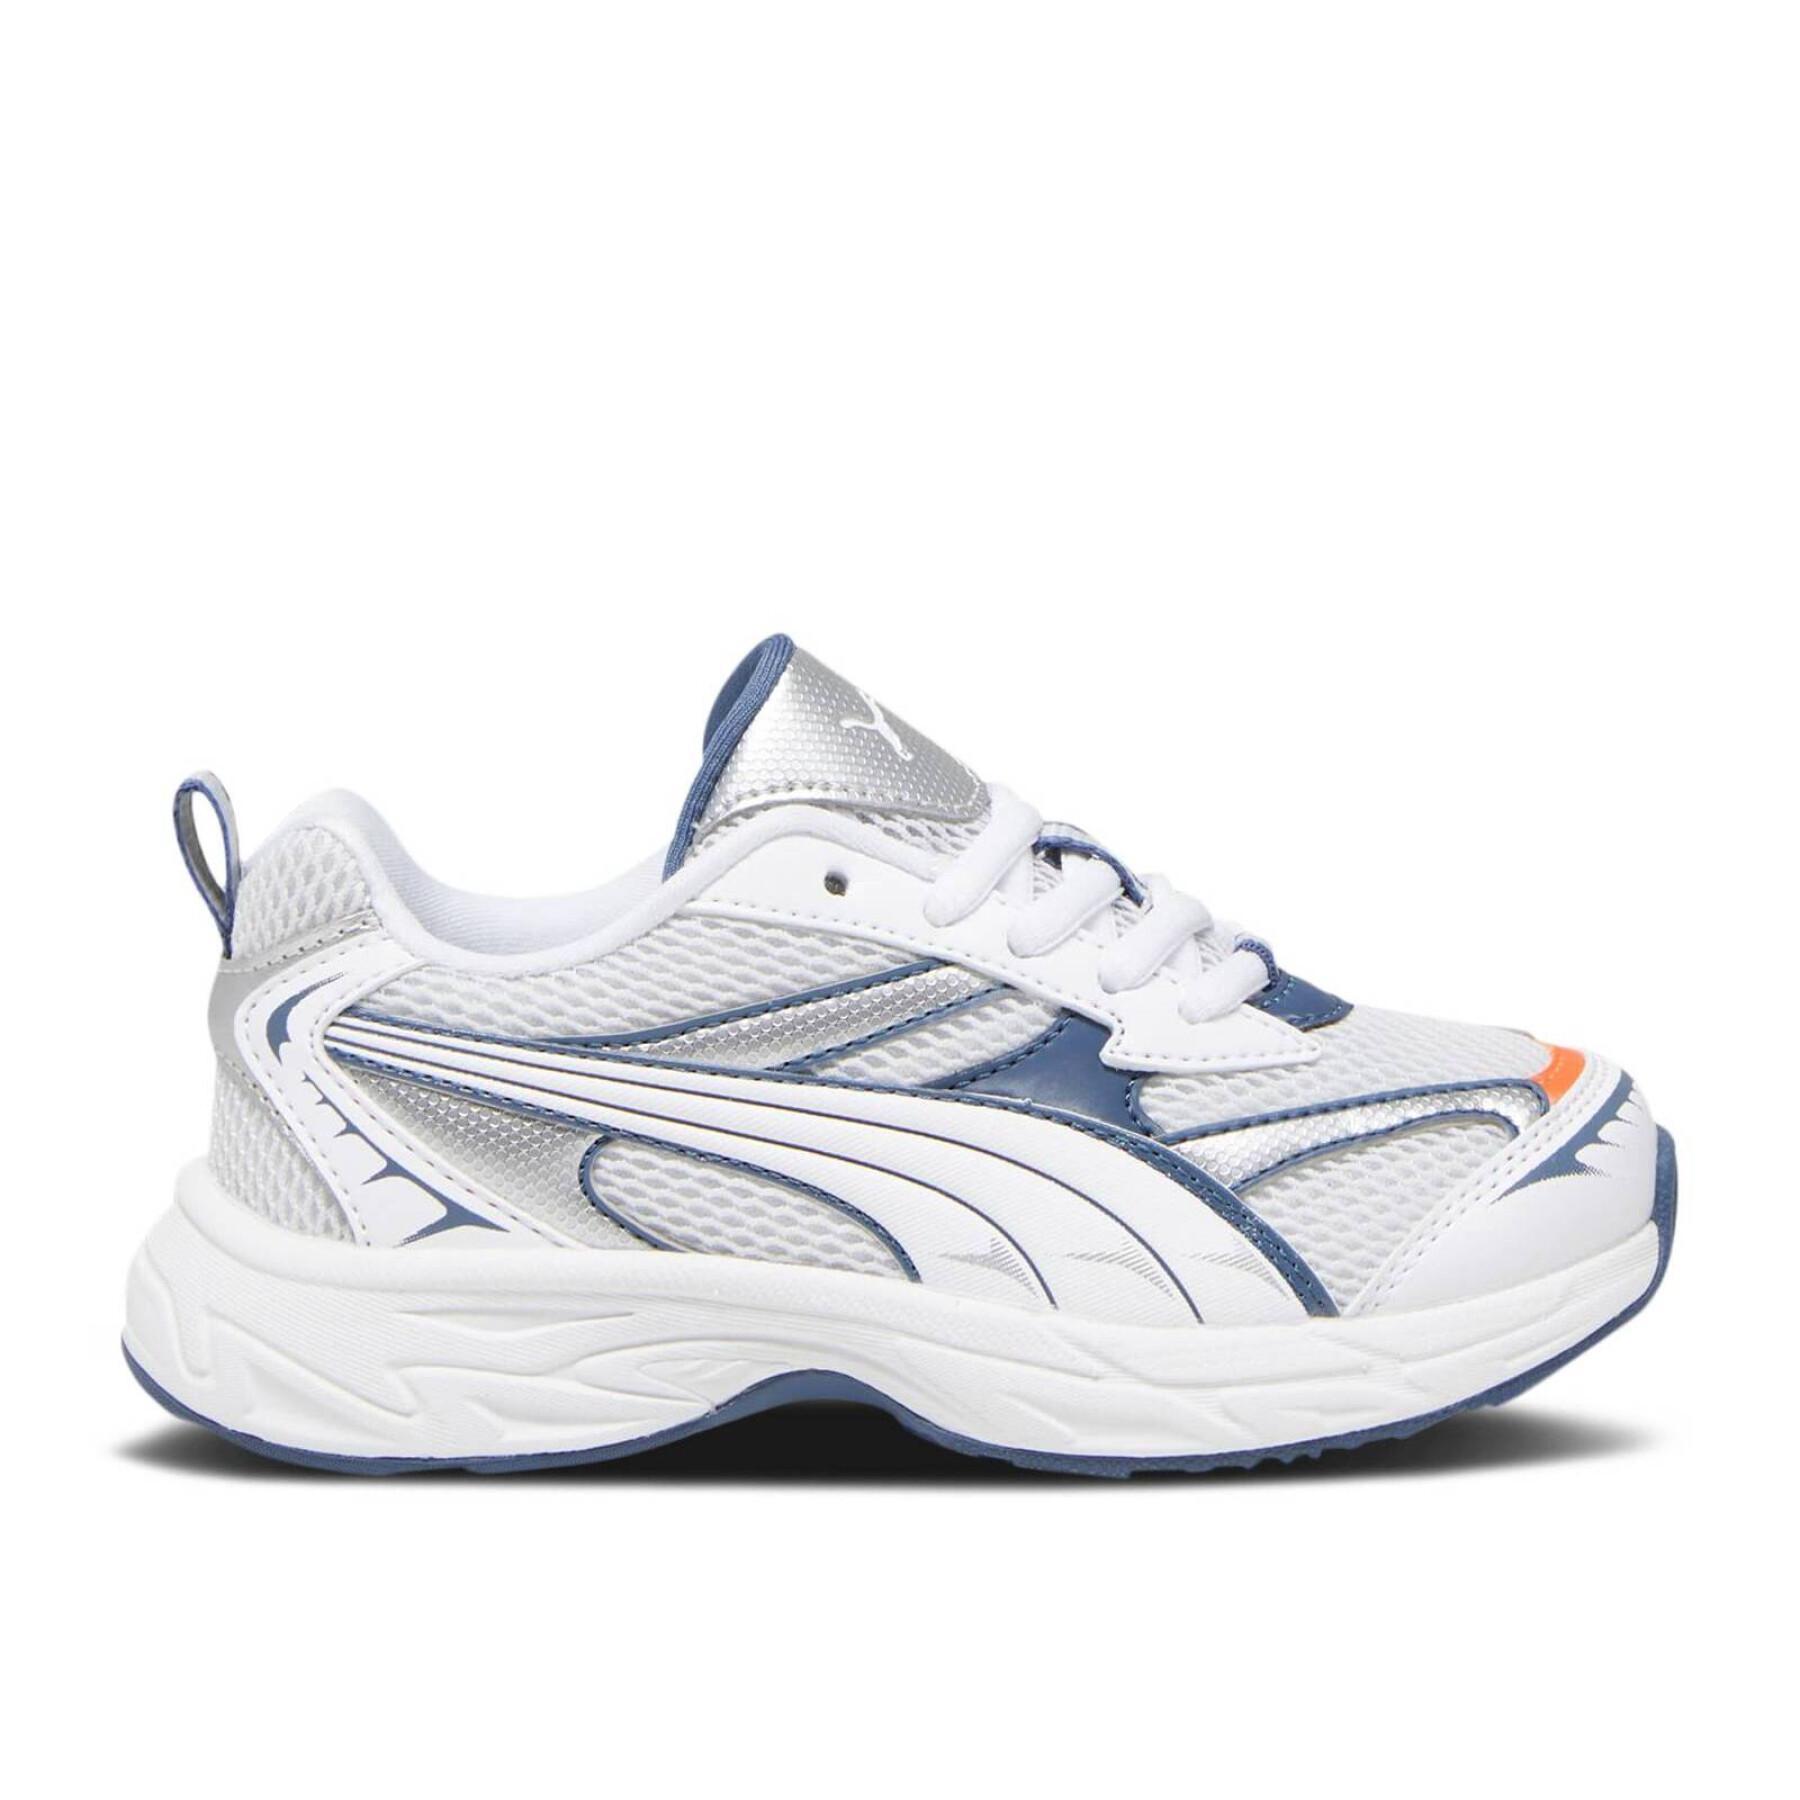 Sneakers Kind Puma Morphic PS